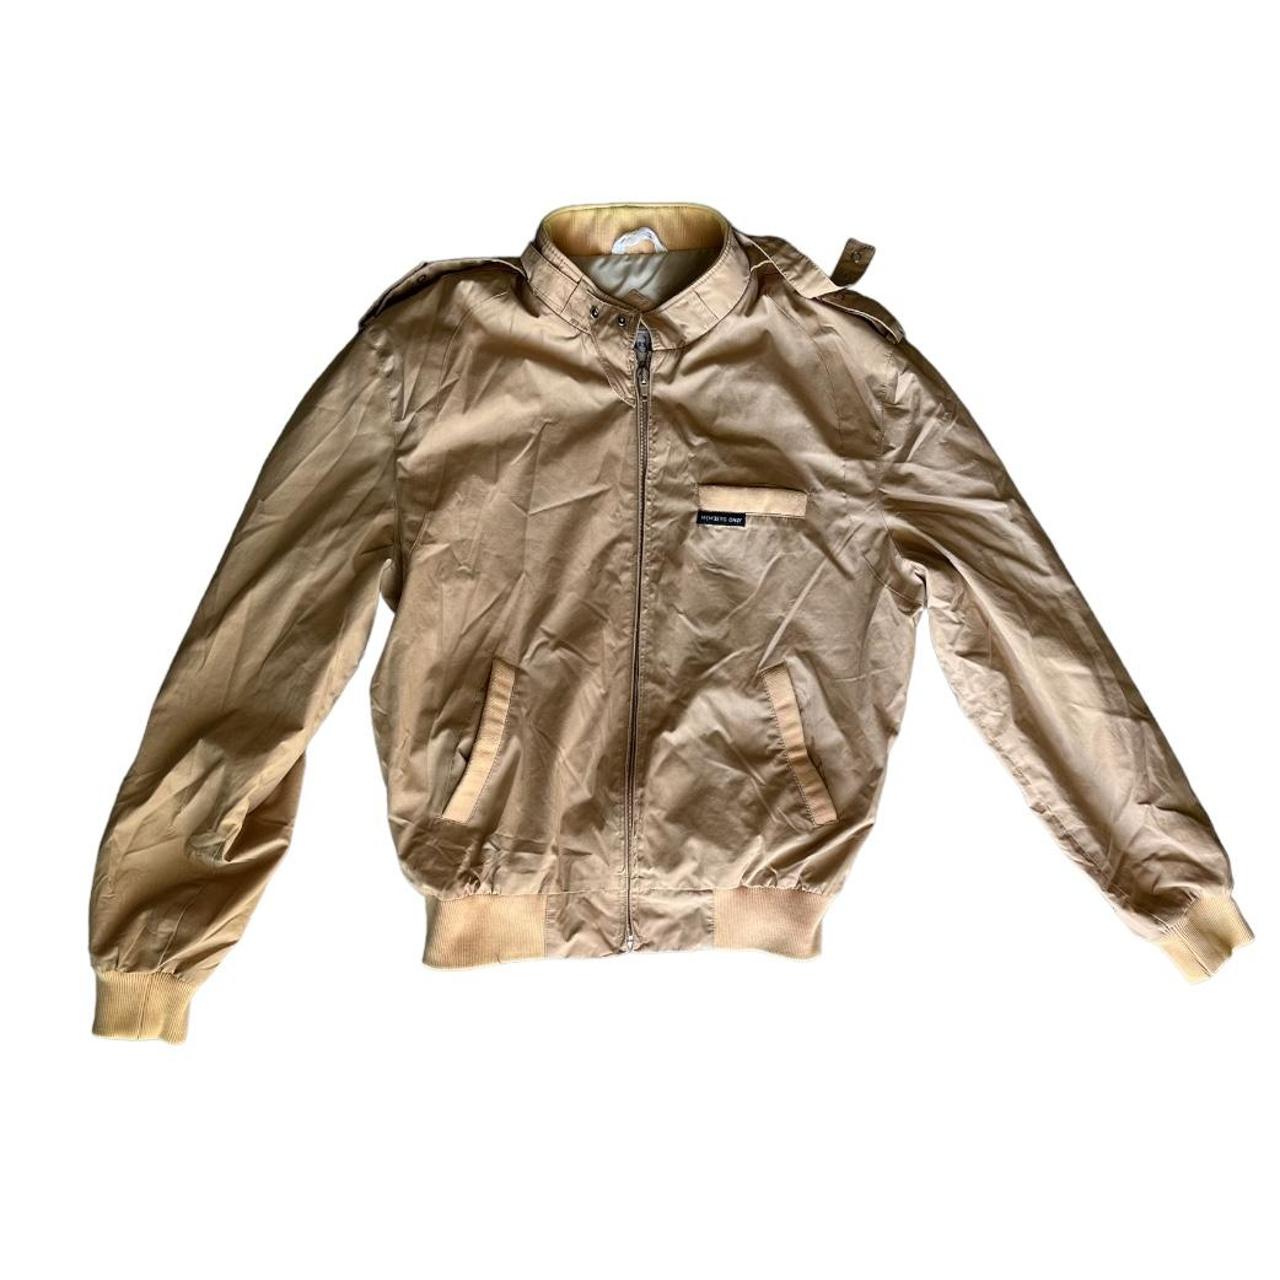 Members Only Men's Tan and Cream Jacket